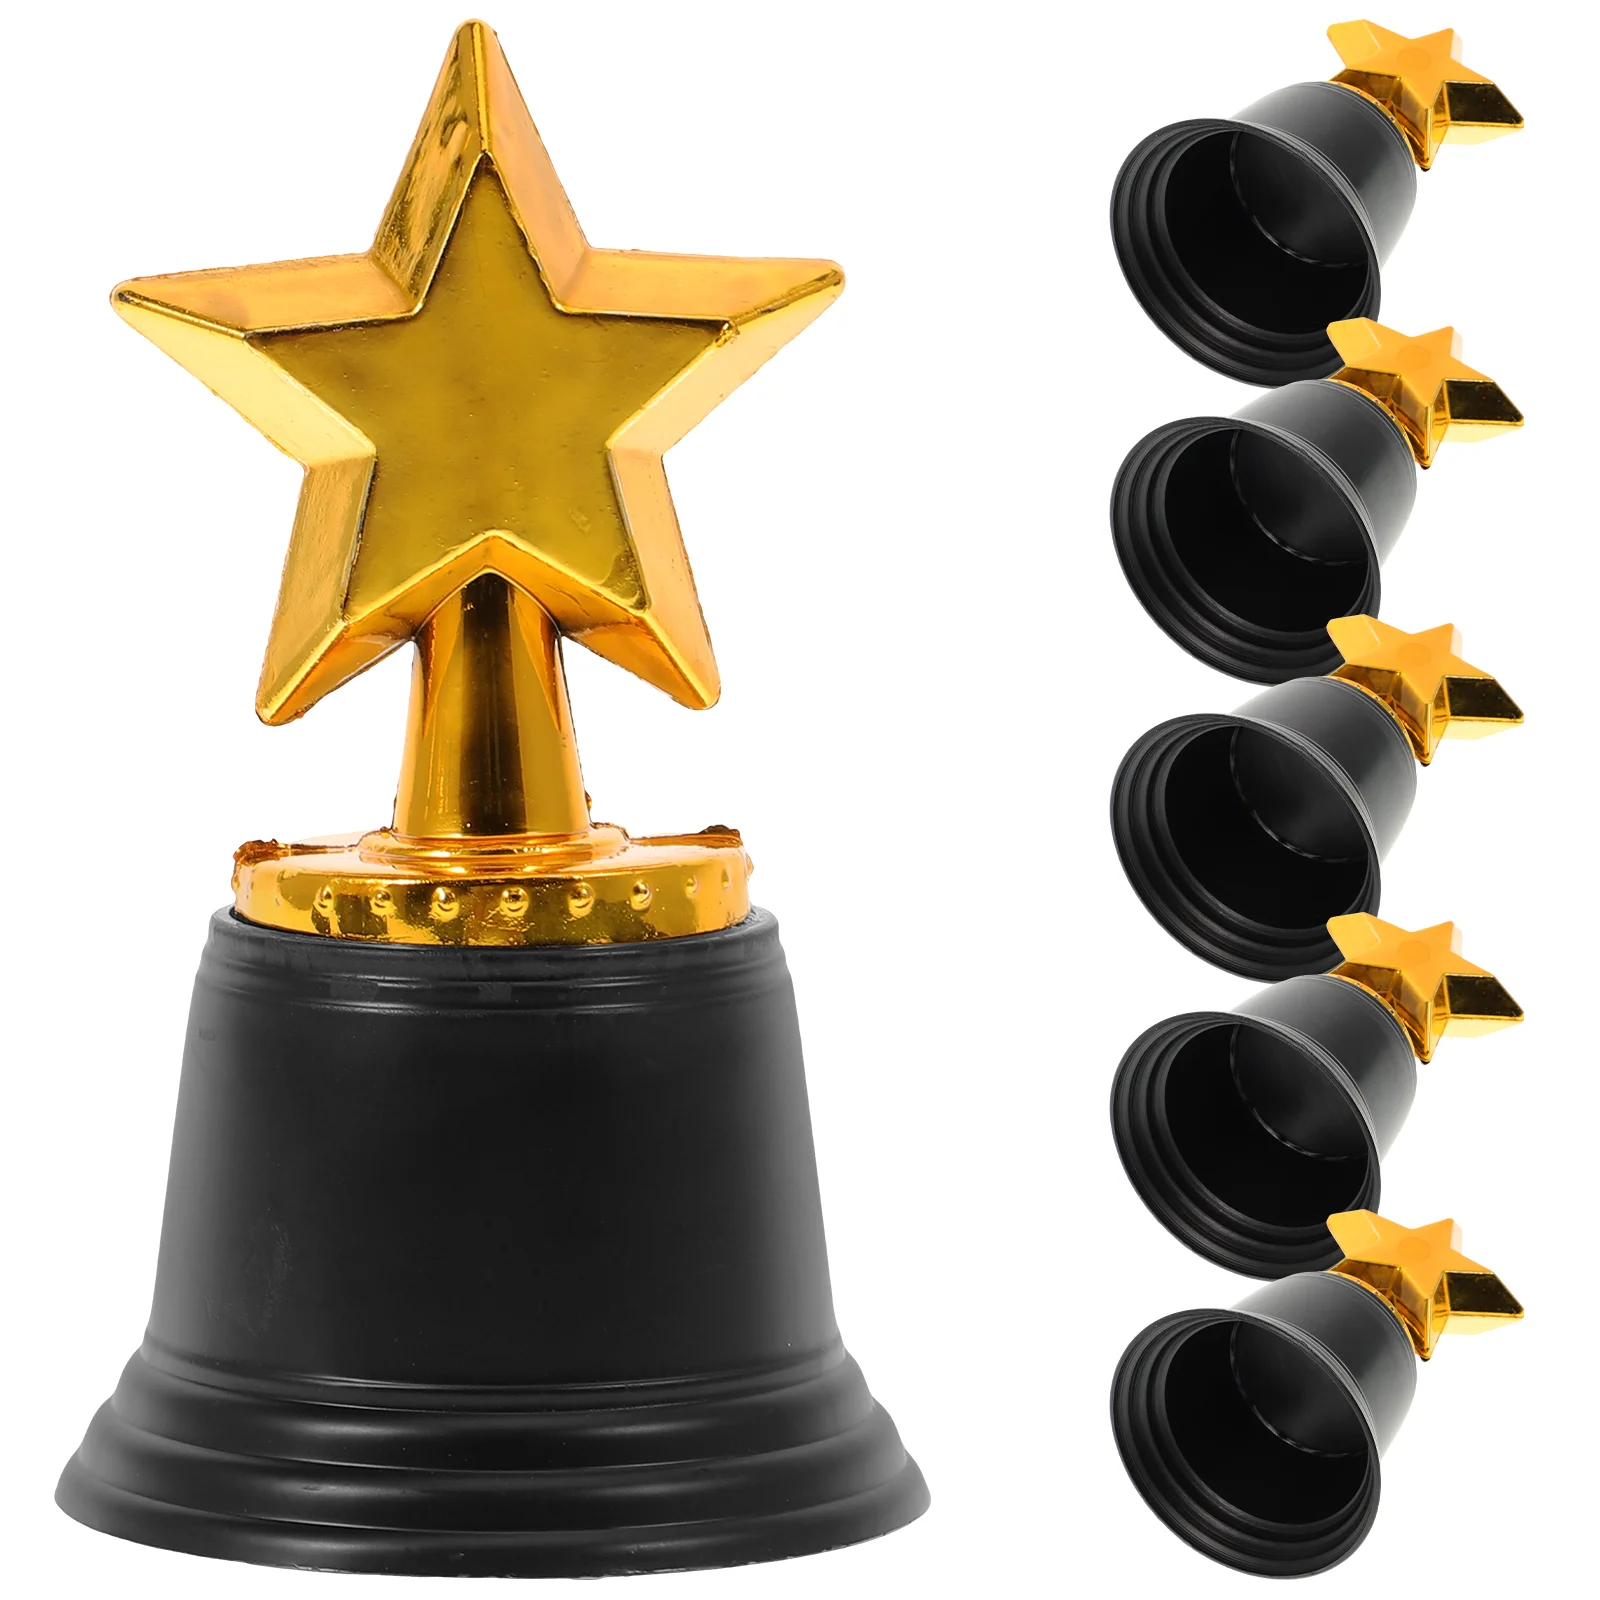 

Toyvian Christmas Gifts Mini Star Award Trophy Pack 12 Bulk Gold Trophies Kids Party Favors Competitions Ceremony Appreciation